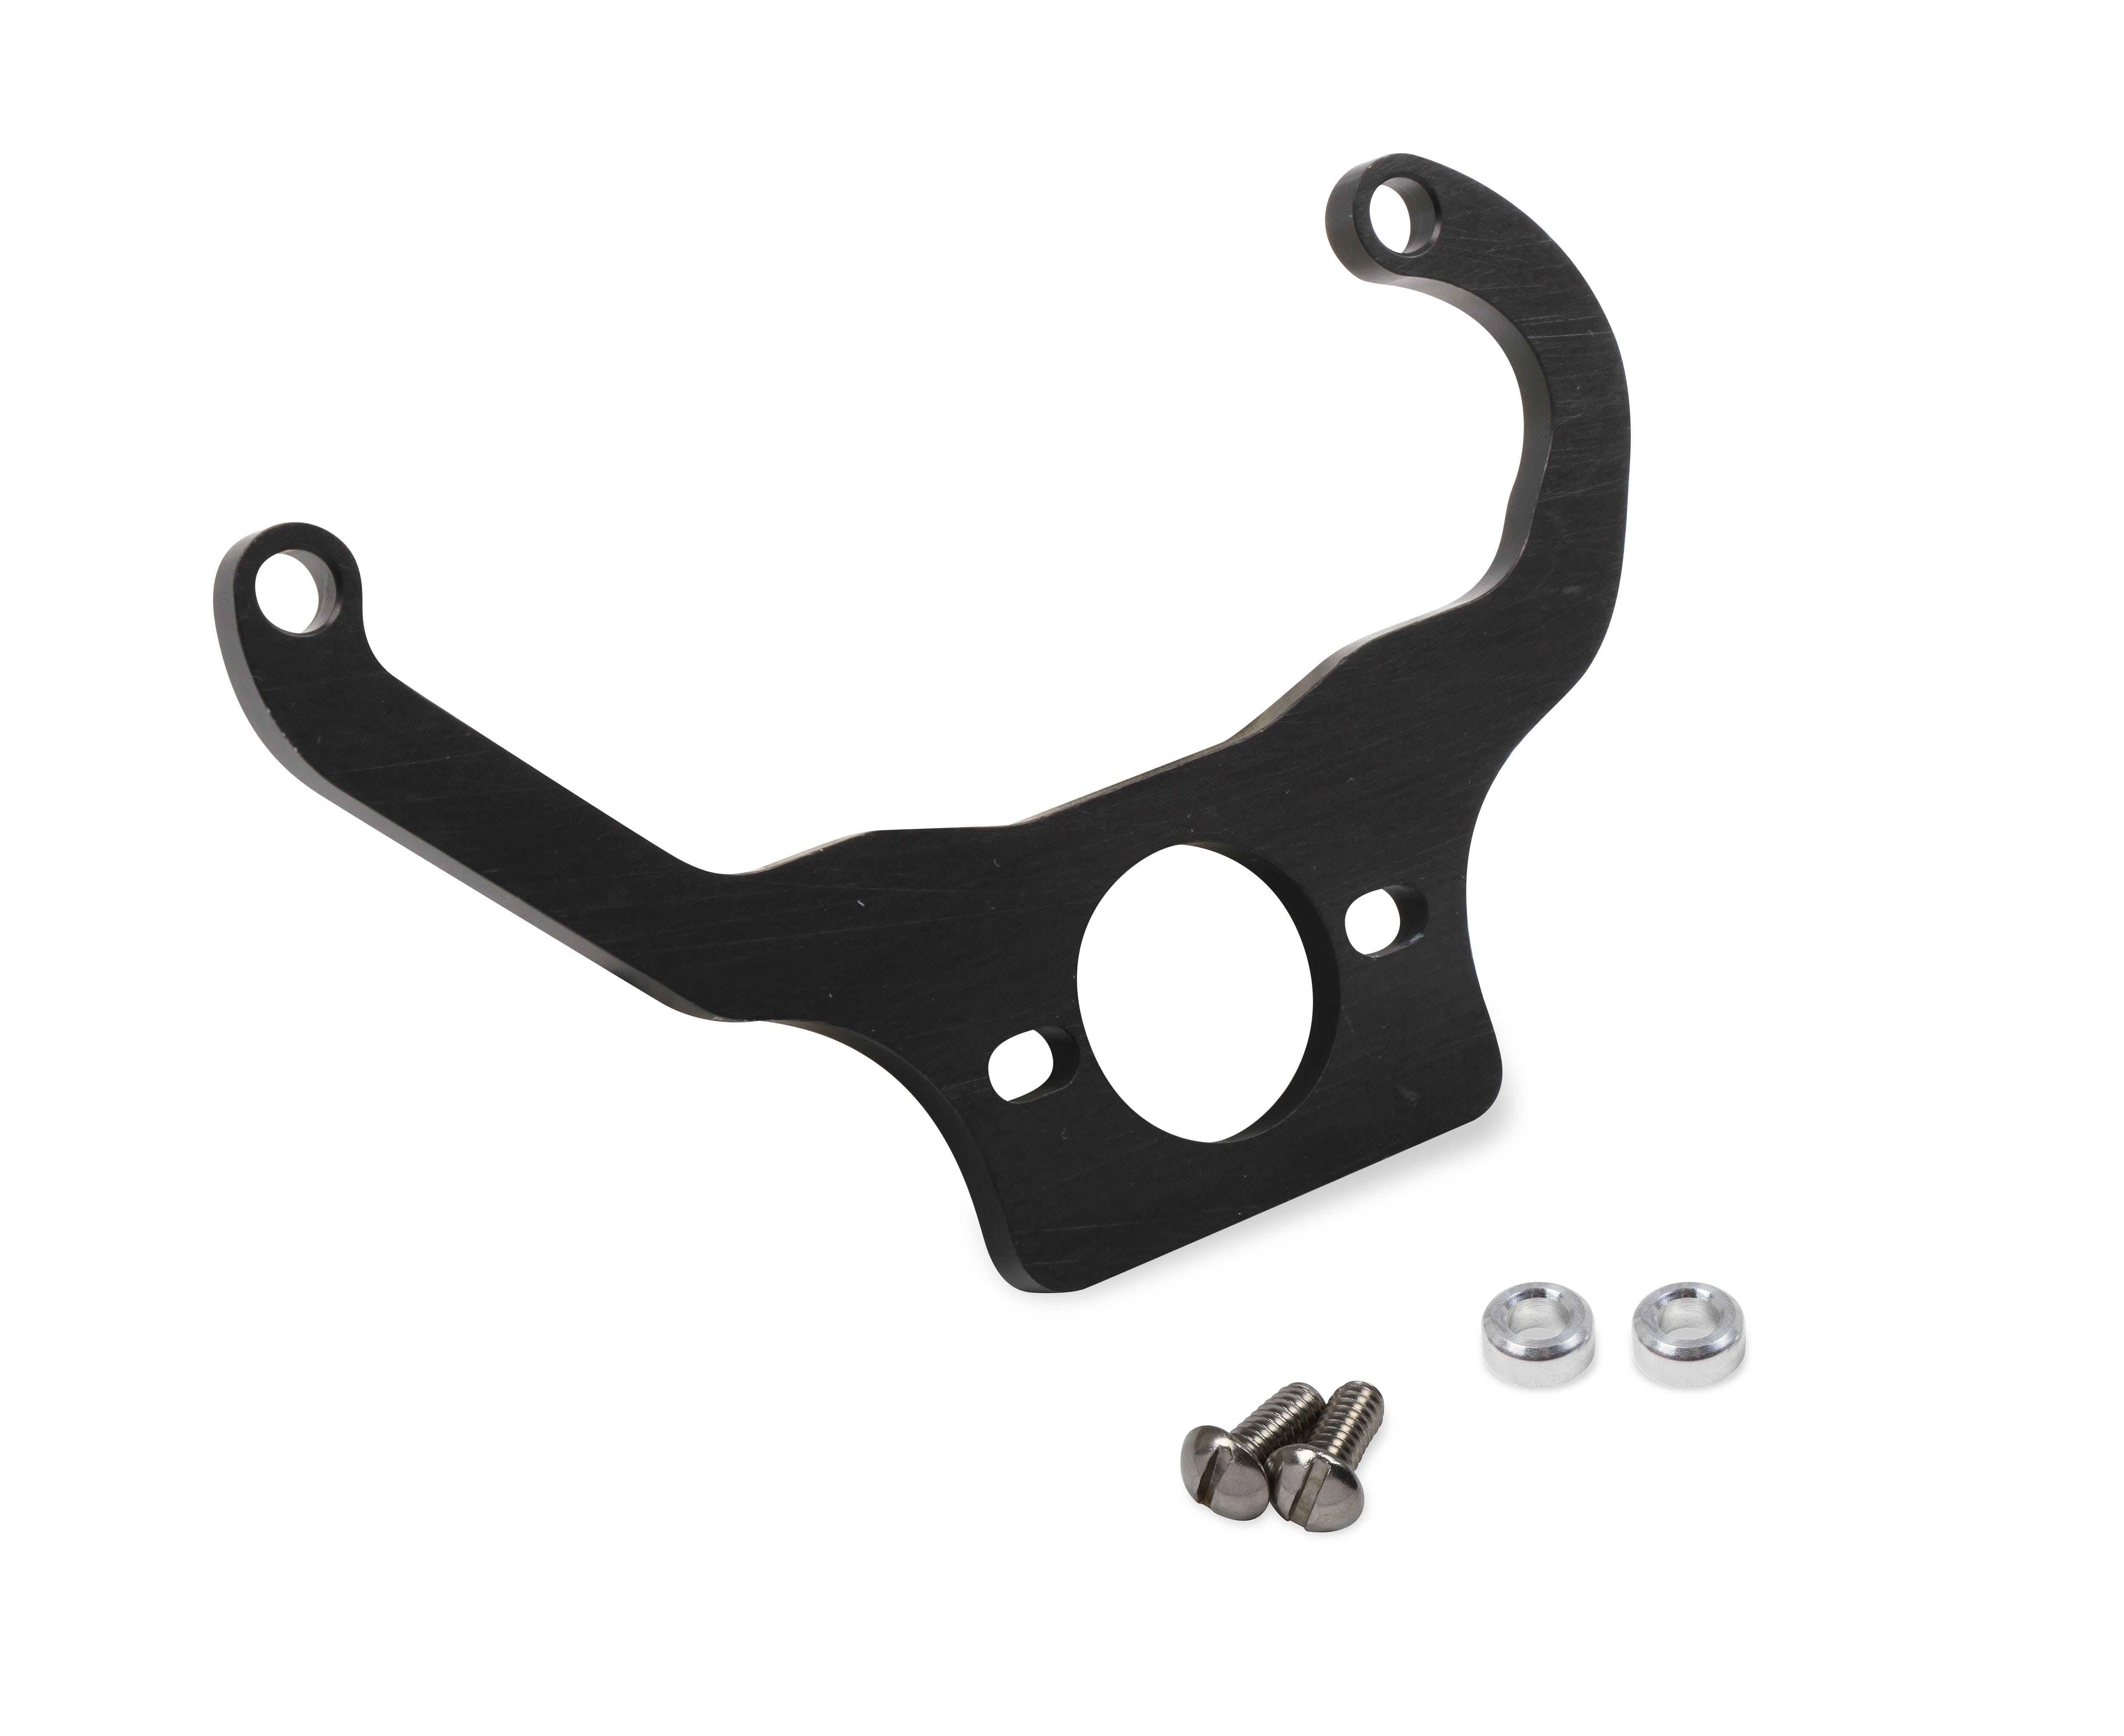 Holley 20-276 BLACK FUEL REGUL BRKT FITS 4500 CARB and H